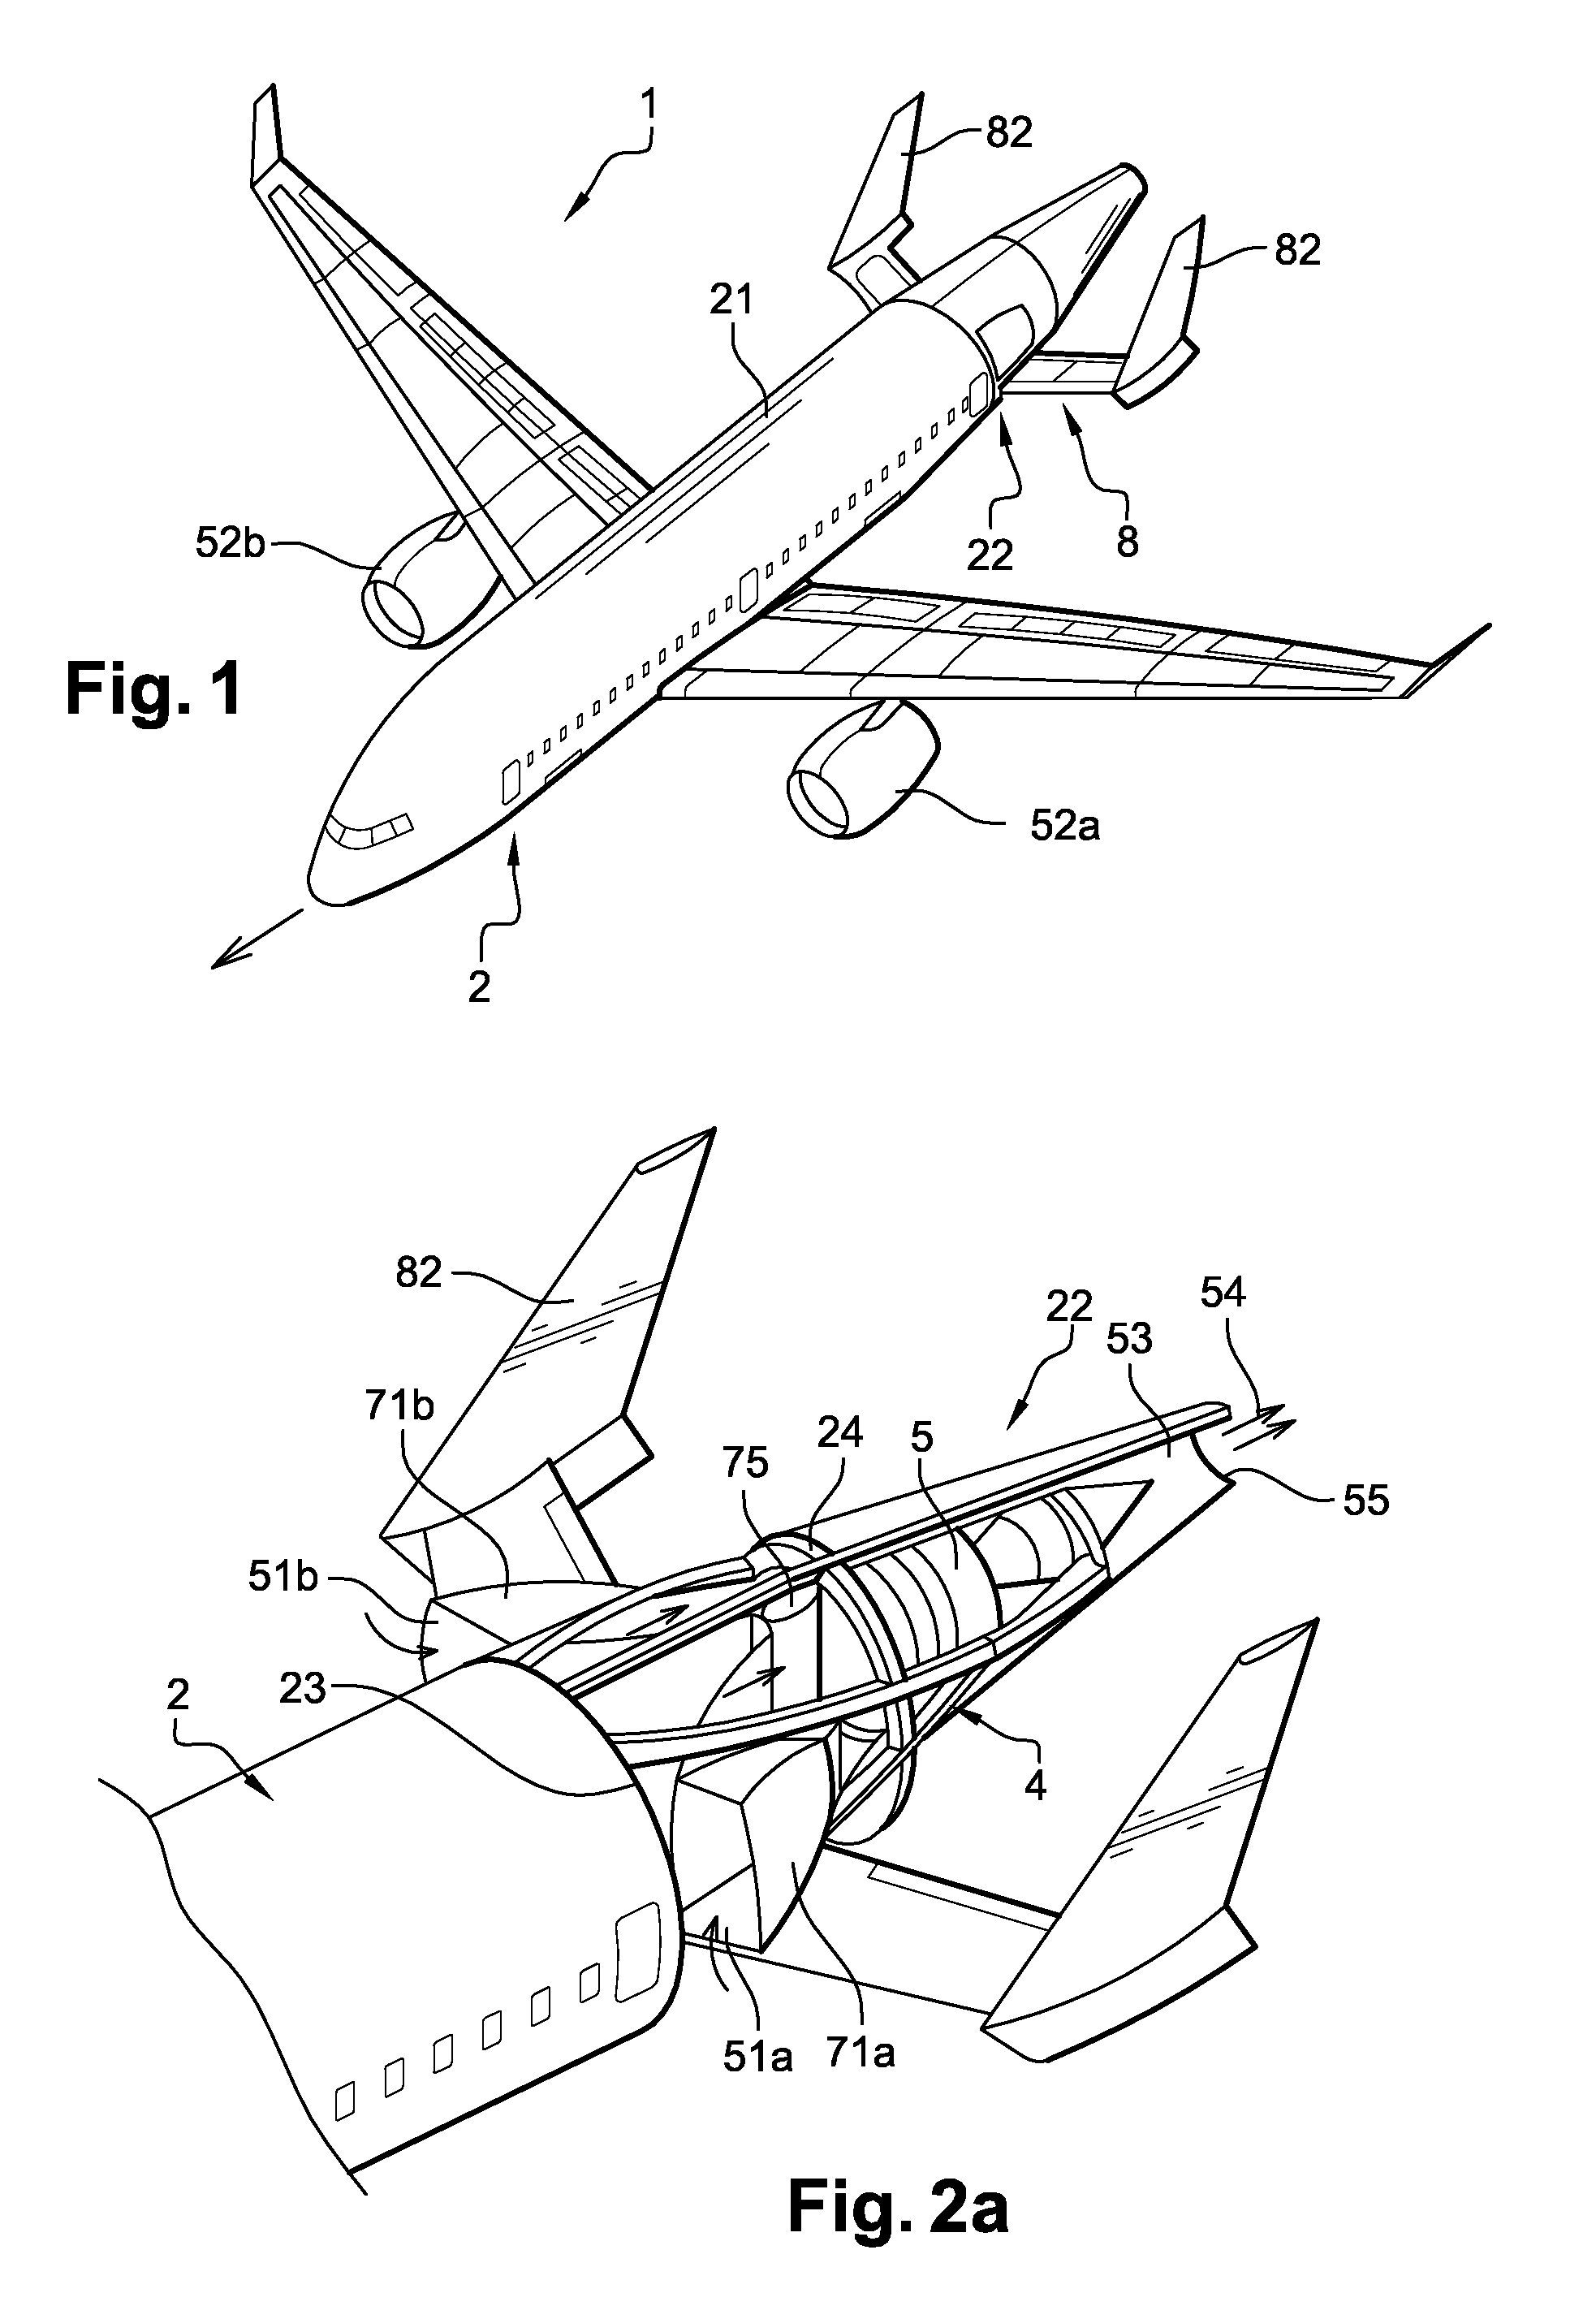 Rear propulsion system with lateral air inlets for an aircraft with such system